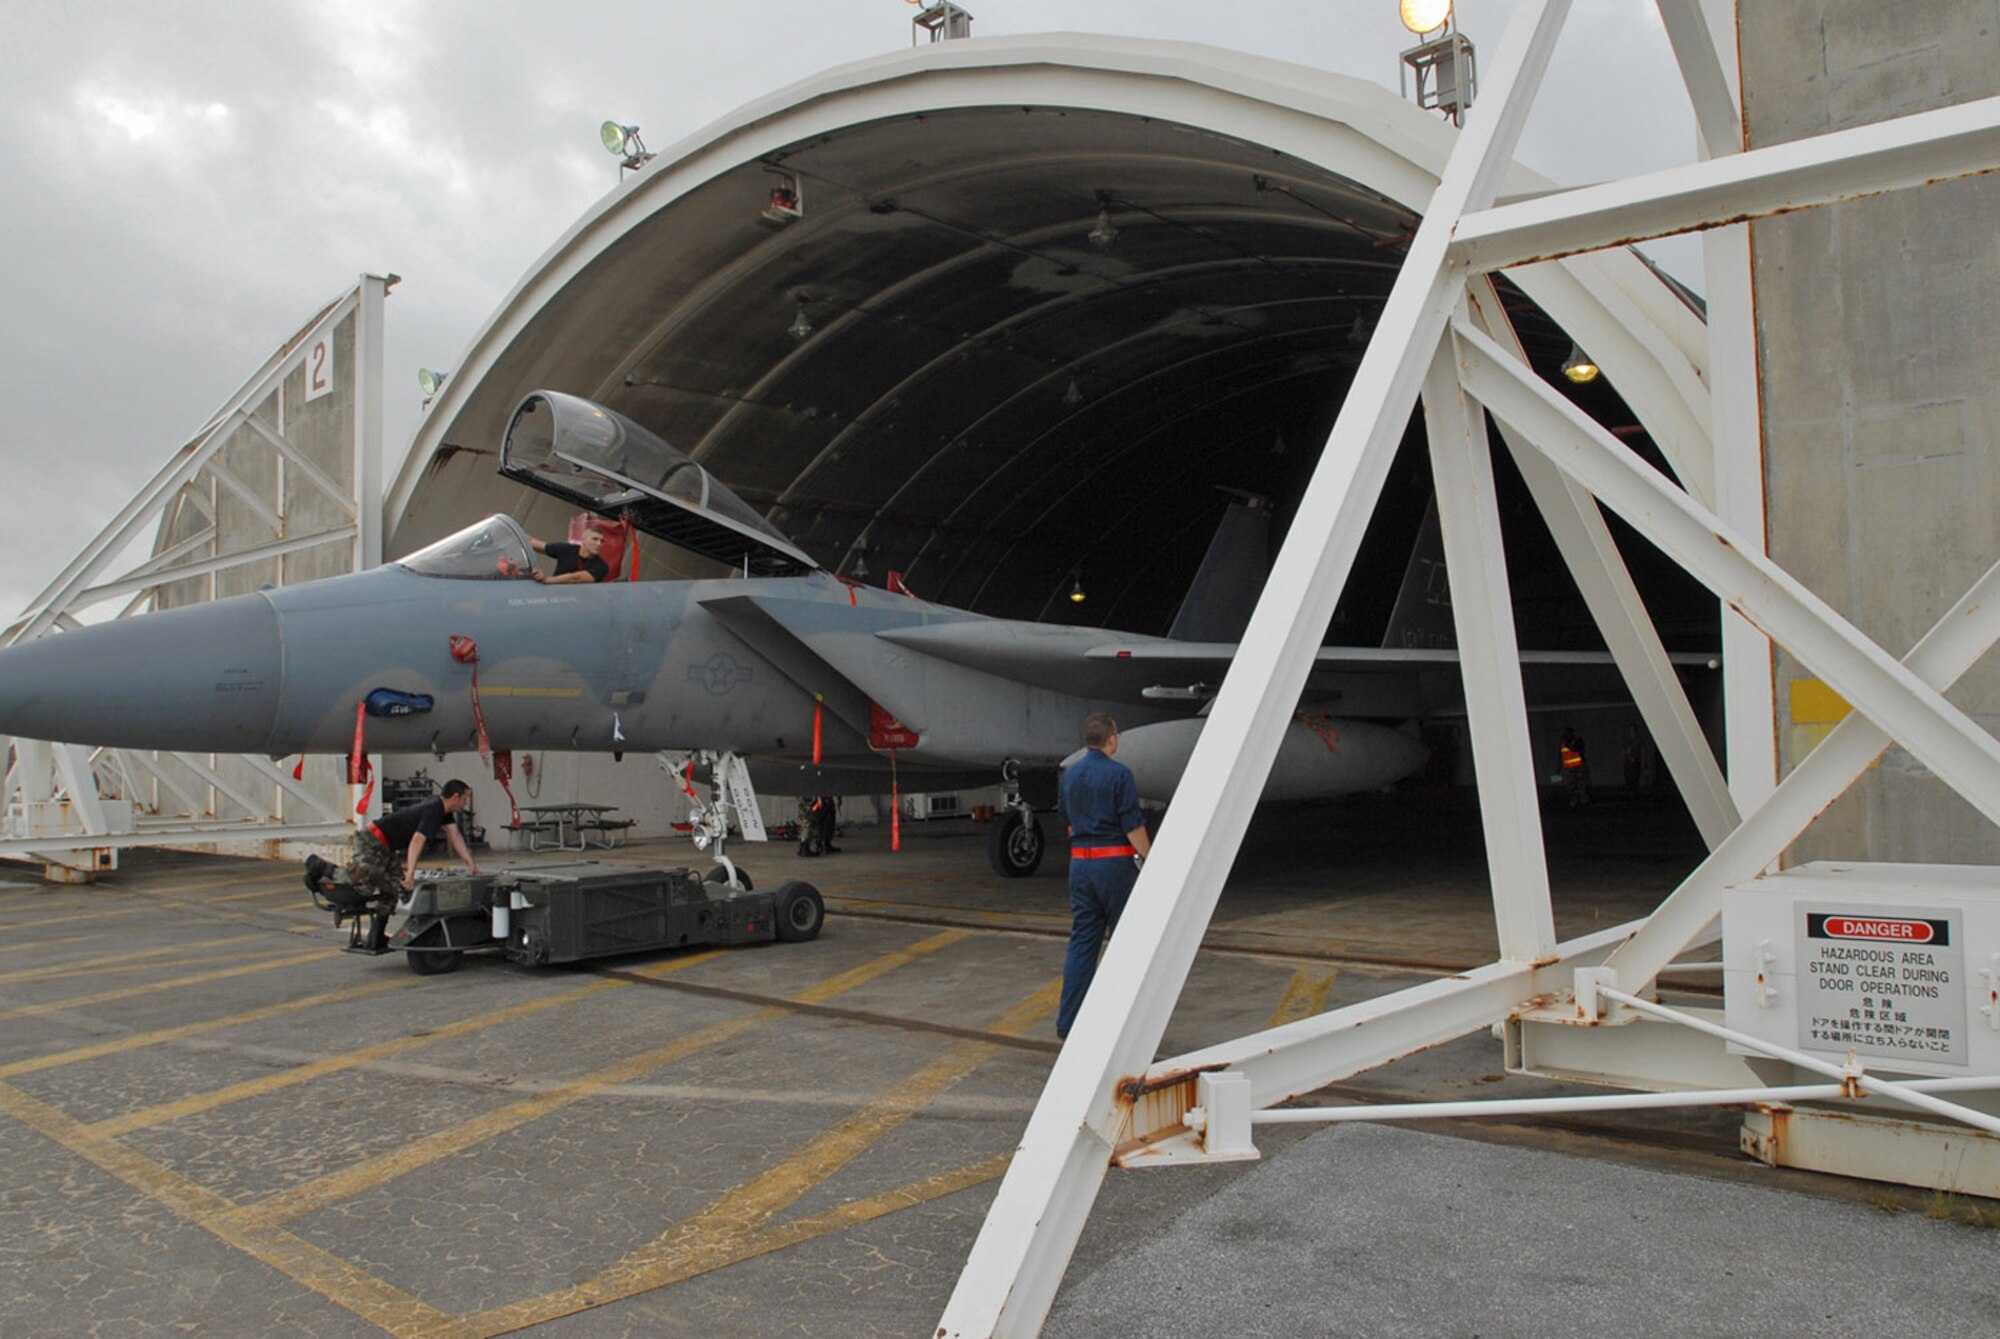 Airmen from the 18th Aircraft Maintenance Squadron tow an F-15 Eagle into a protective aircraft shelter in preparation for Typhoon Man-Yi July 12 at Kadena Air Base, Japan. Typhoon Man-Yi is expected to hit Okinawa July 13. It is the first typhoon of the year for the island. (U.S. Air Force/Airman 1st Class Kasey Zickmund)
